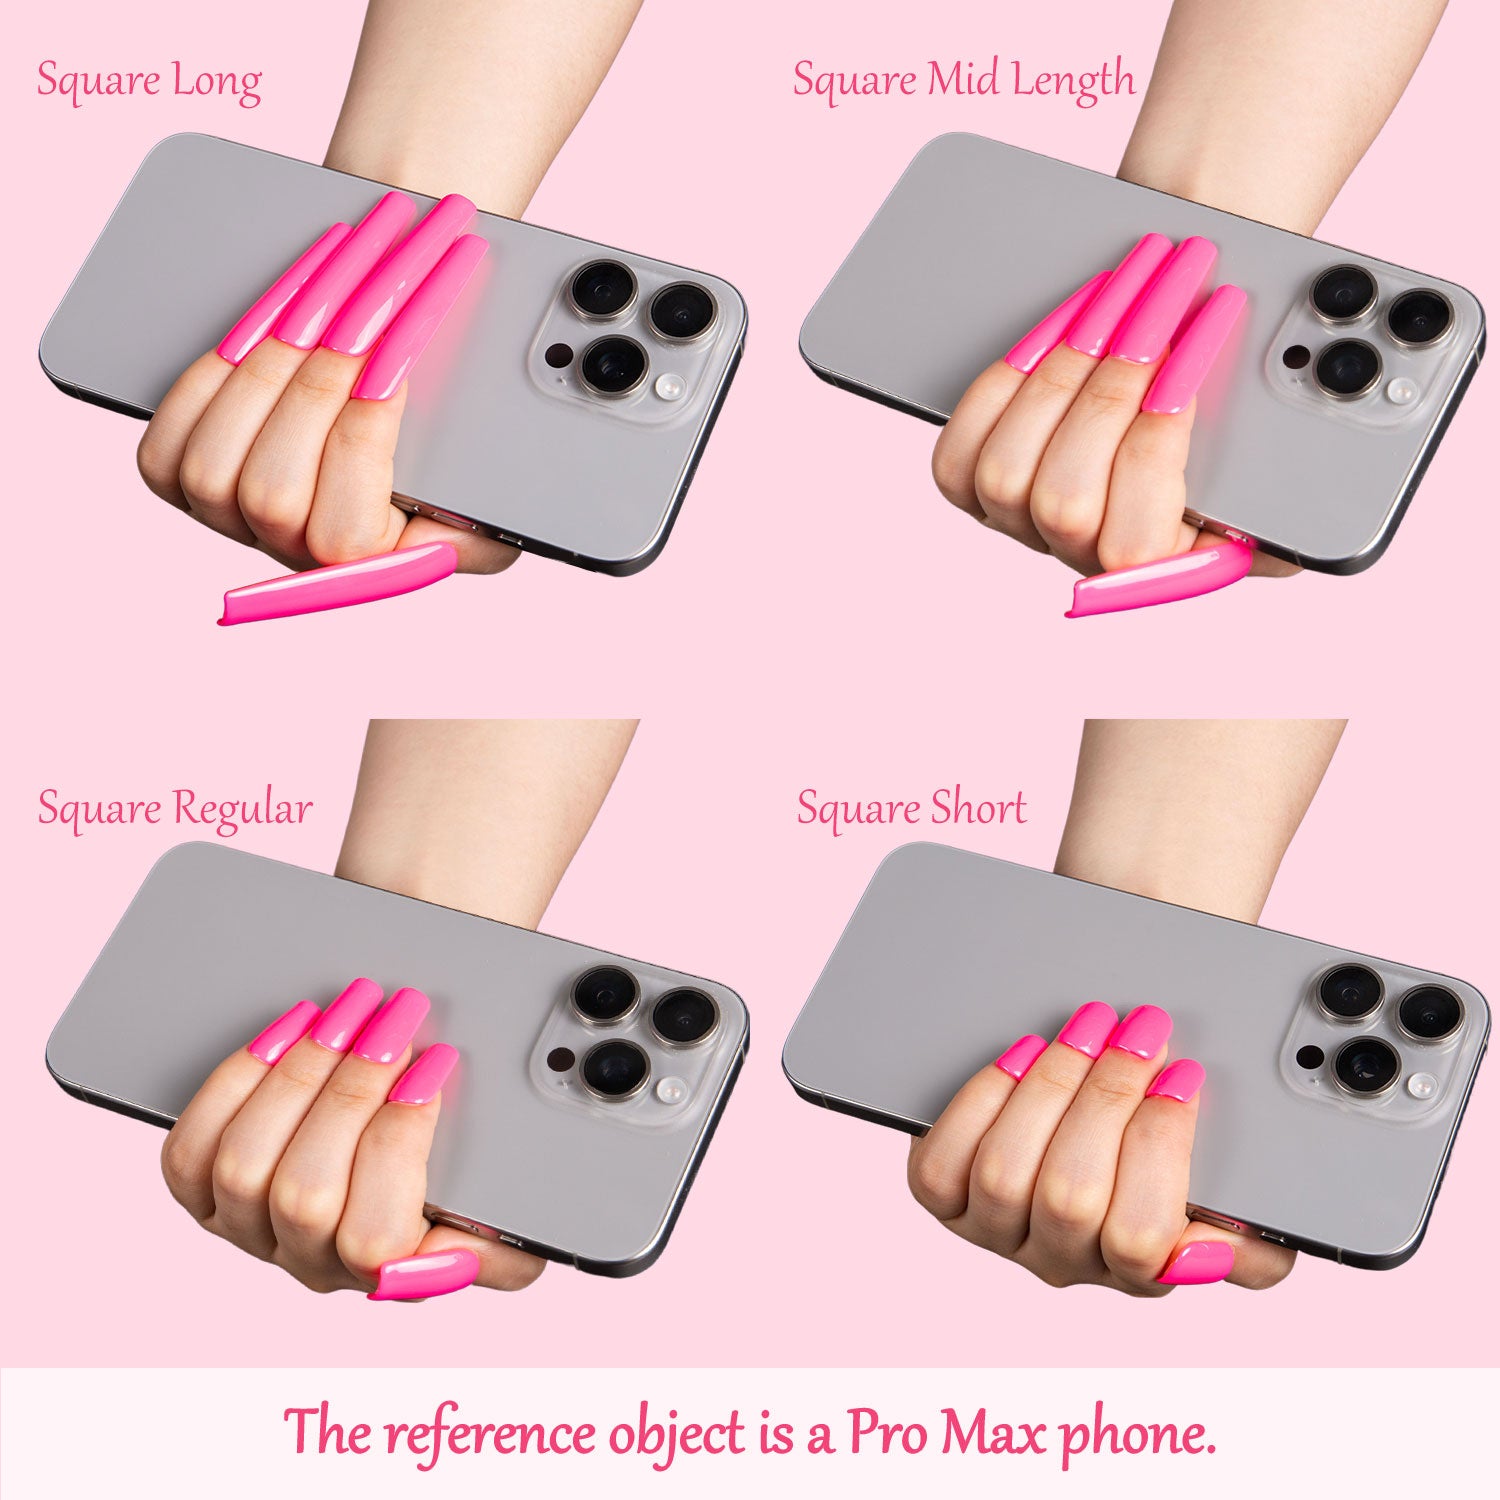 Comparative image of four lengths of bright pink square press-on nails on hands holding a Pro Max phone, labeled as Square Long, Square Mid Length, Square Regular, and Square Short, with a light pink background.